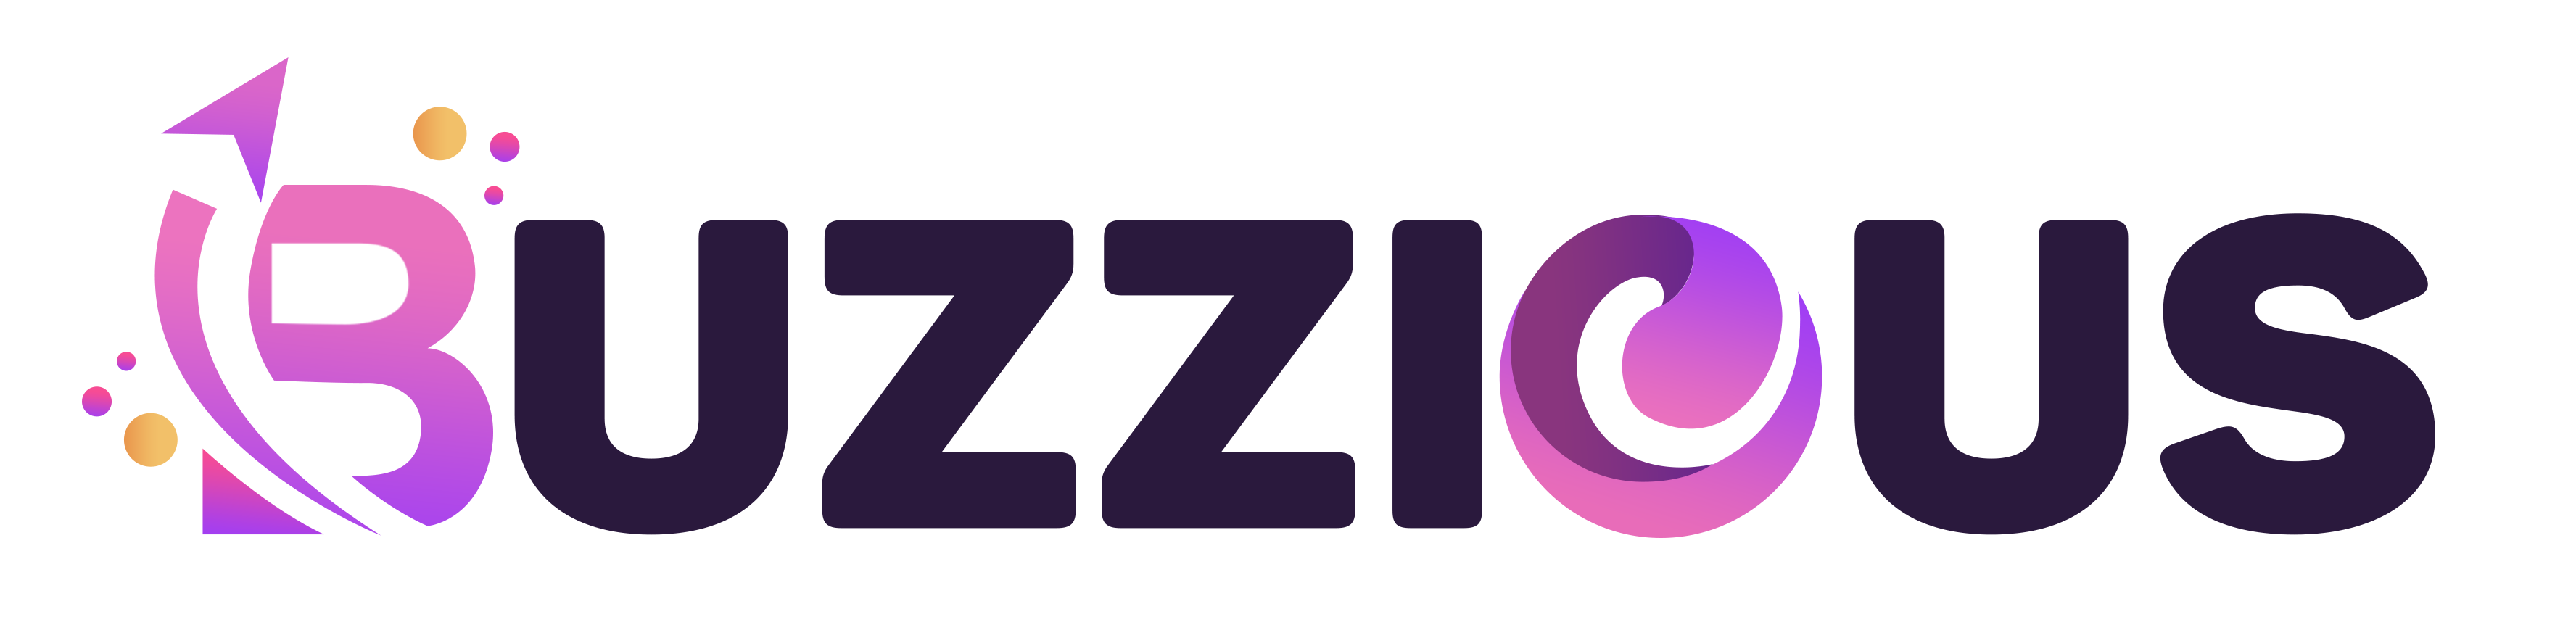 logo3 Buzzious : Create an Empire of Profitable Niche Websites that Generate Traffic and Income on Autopilot… WITHOUT Having to Write Any Content! #contentmarketing #digitalmarketer